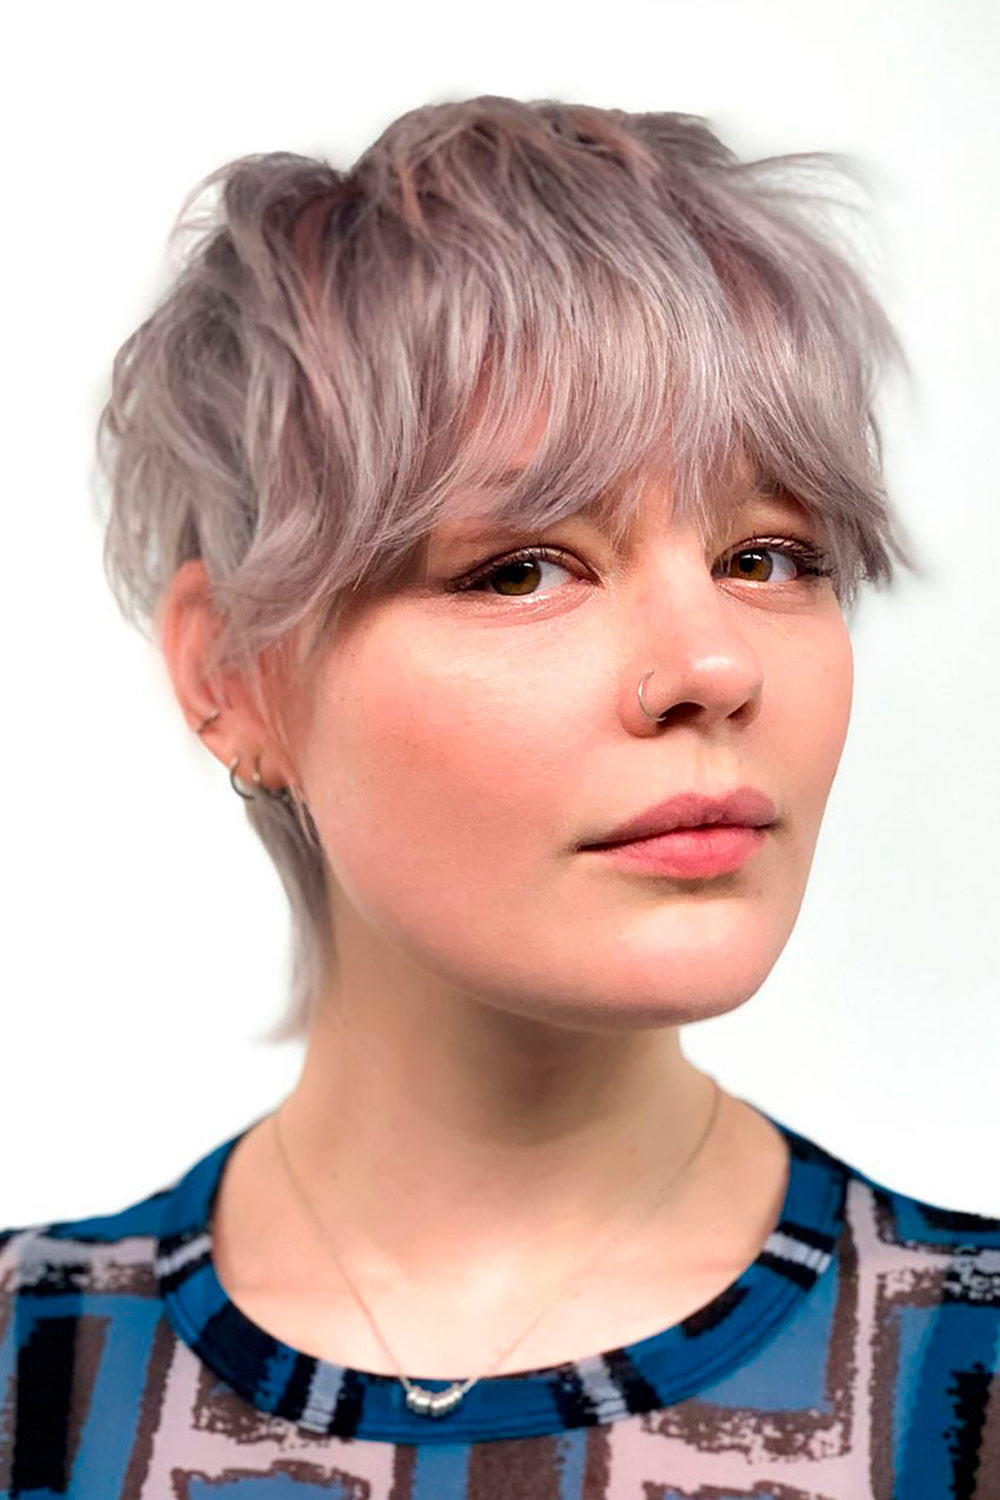 Go all in with the shaggy pixie style if you definitely aren’t interested in a cute look